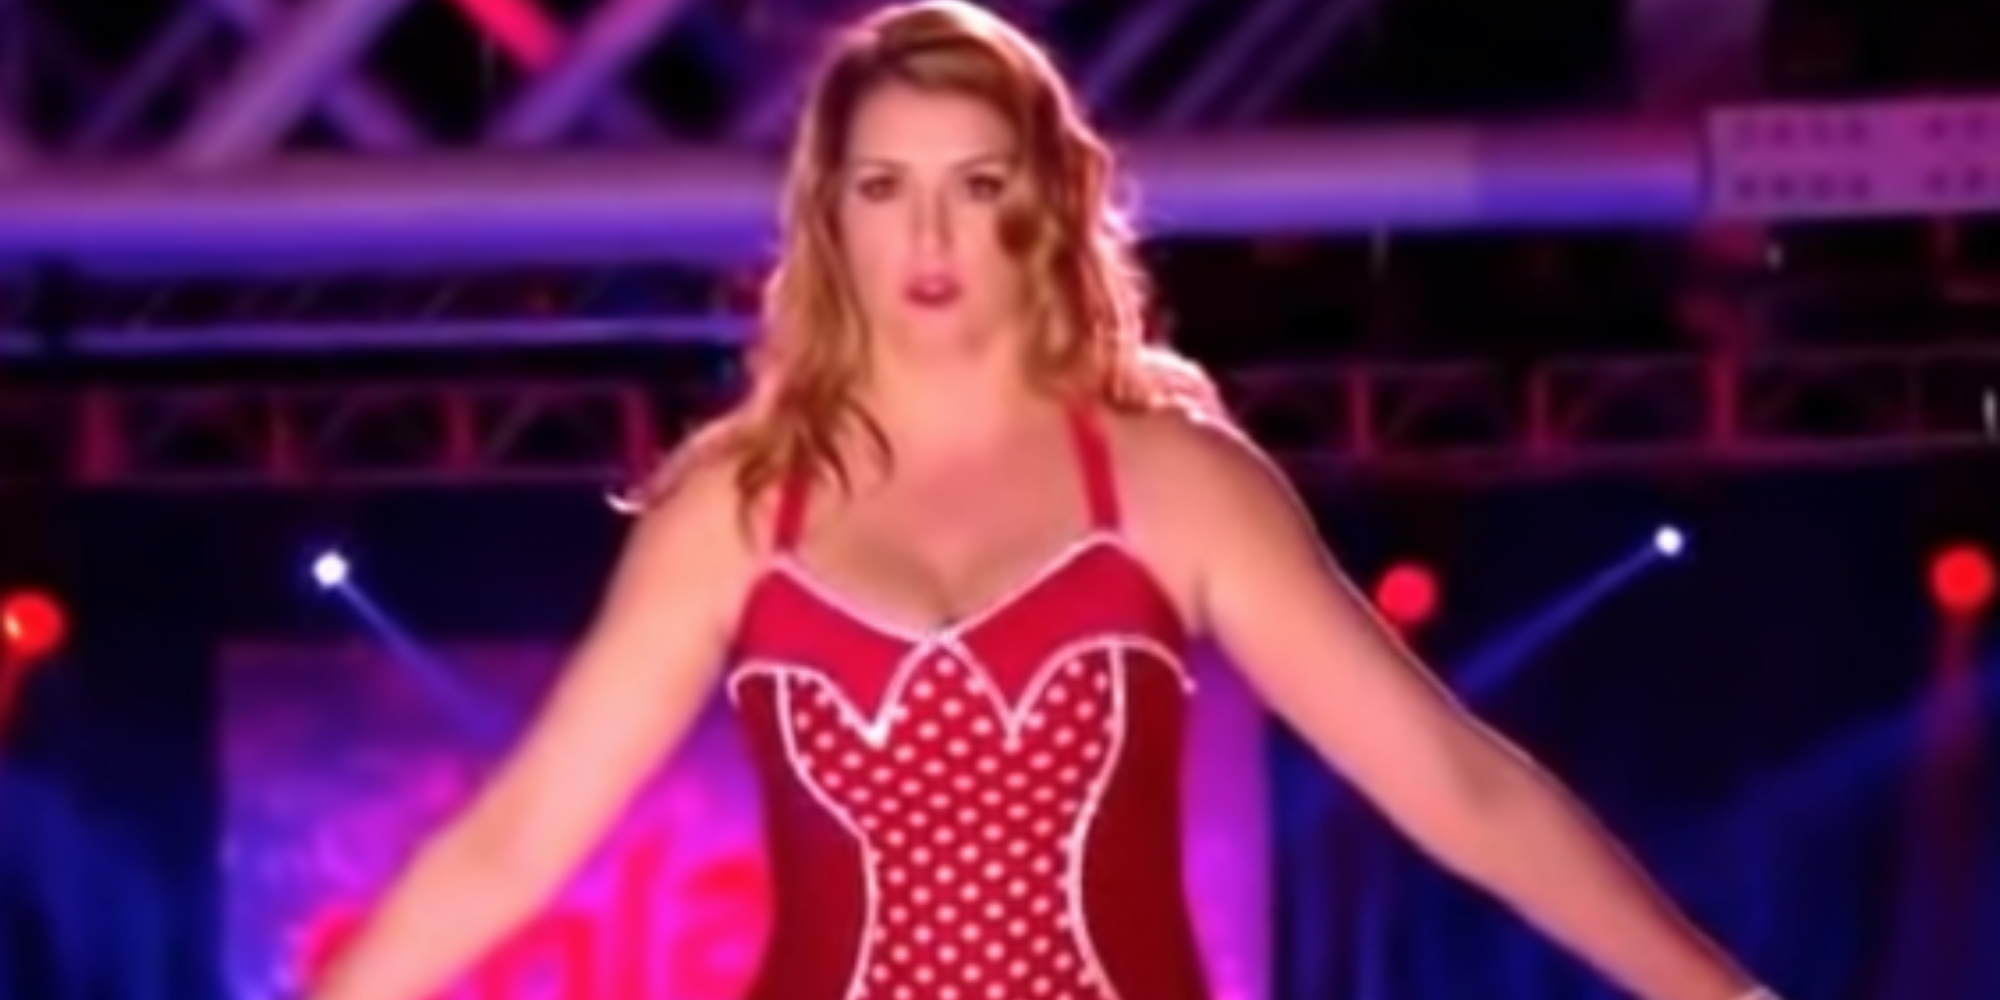 Penny Mordaunt On Splash Video Resurfaces As Mp Becomes Defence